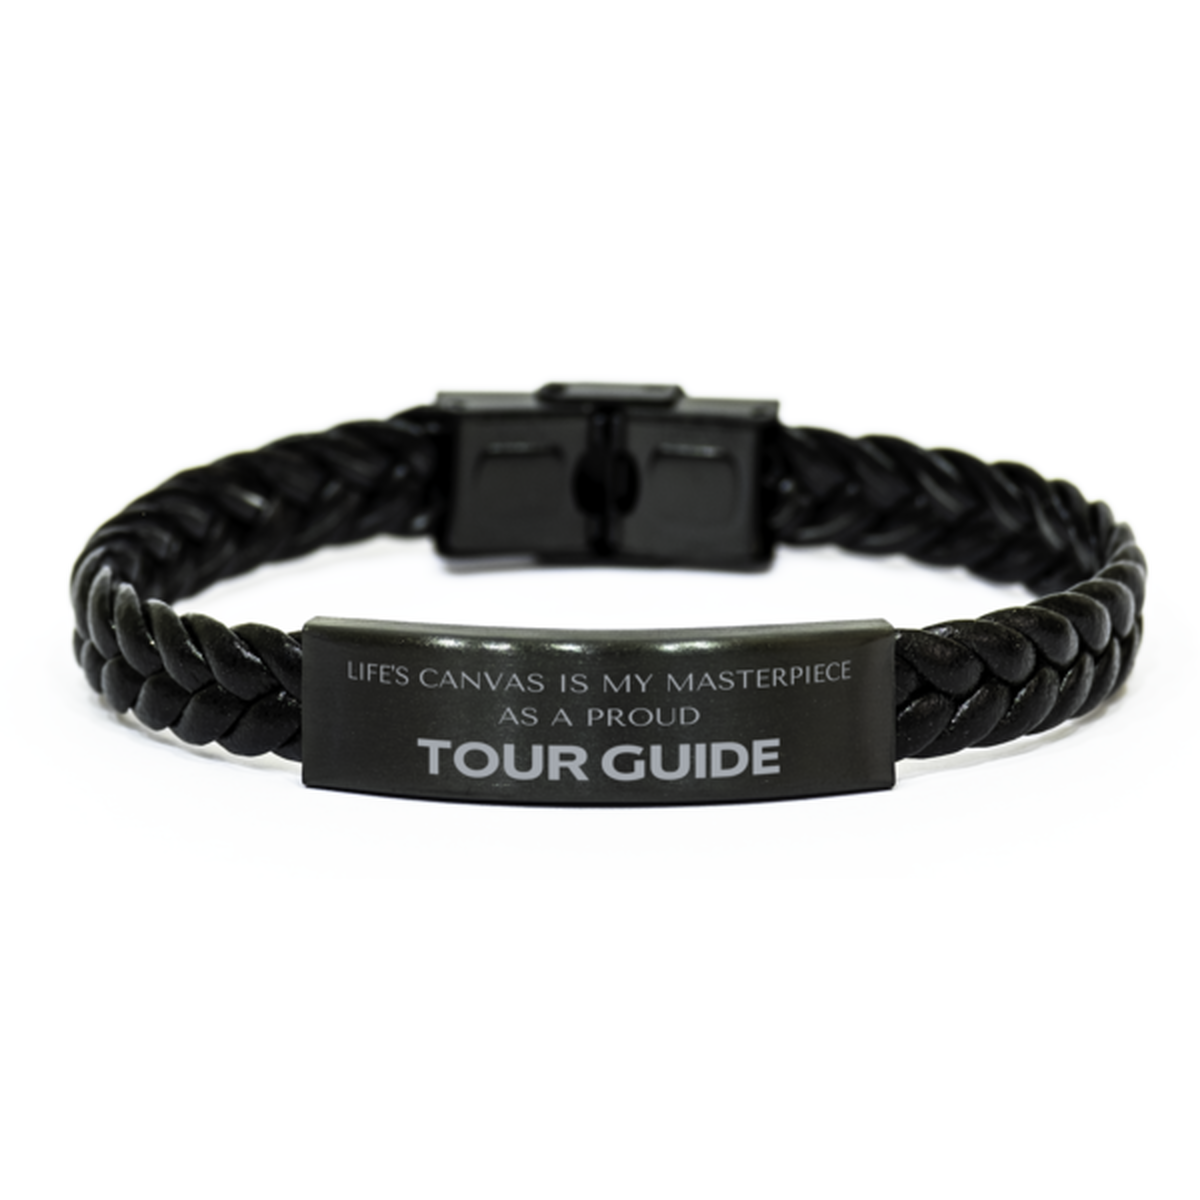 Proud Tour Guide Gifts, Life's canvas is my masterpiece, Epic Birthday Christmas Unique Braided Leather Bracelet For Tour Guide, Coworkers, Men, Women, Friends